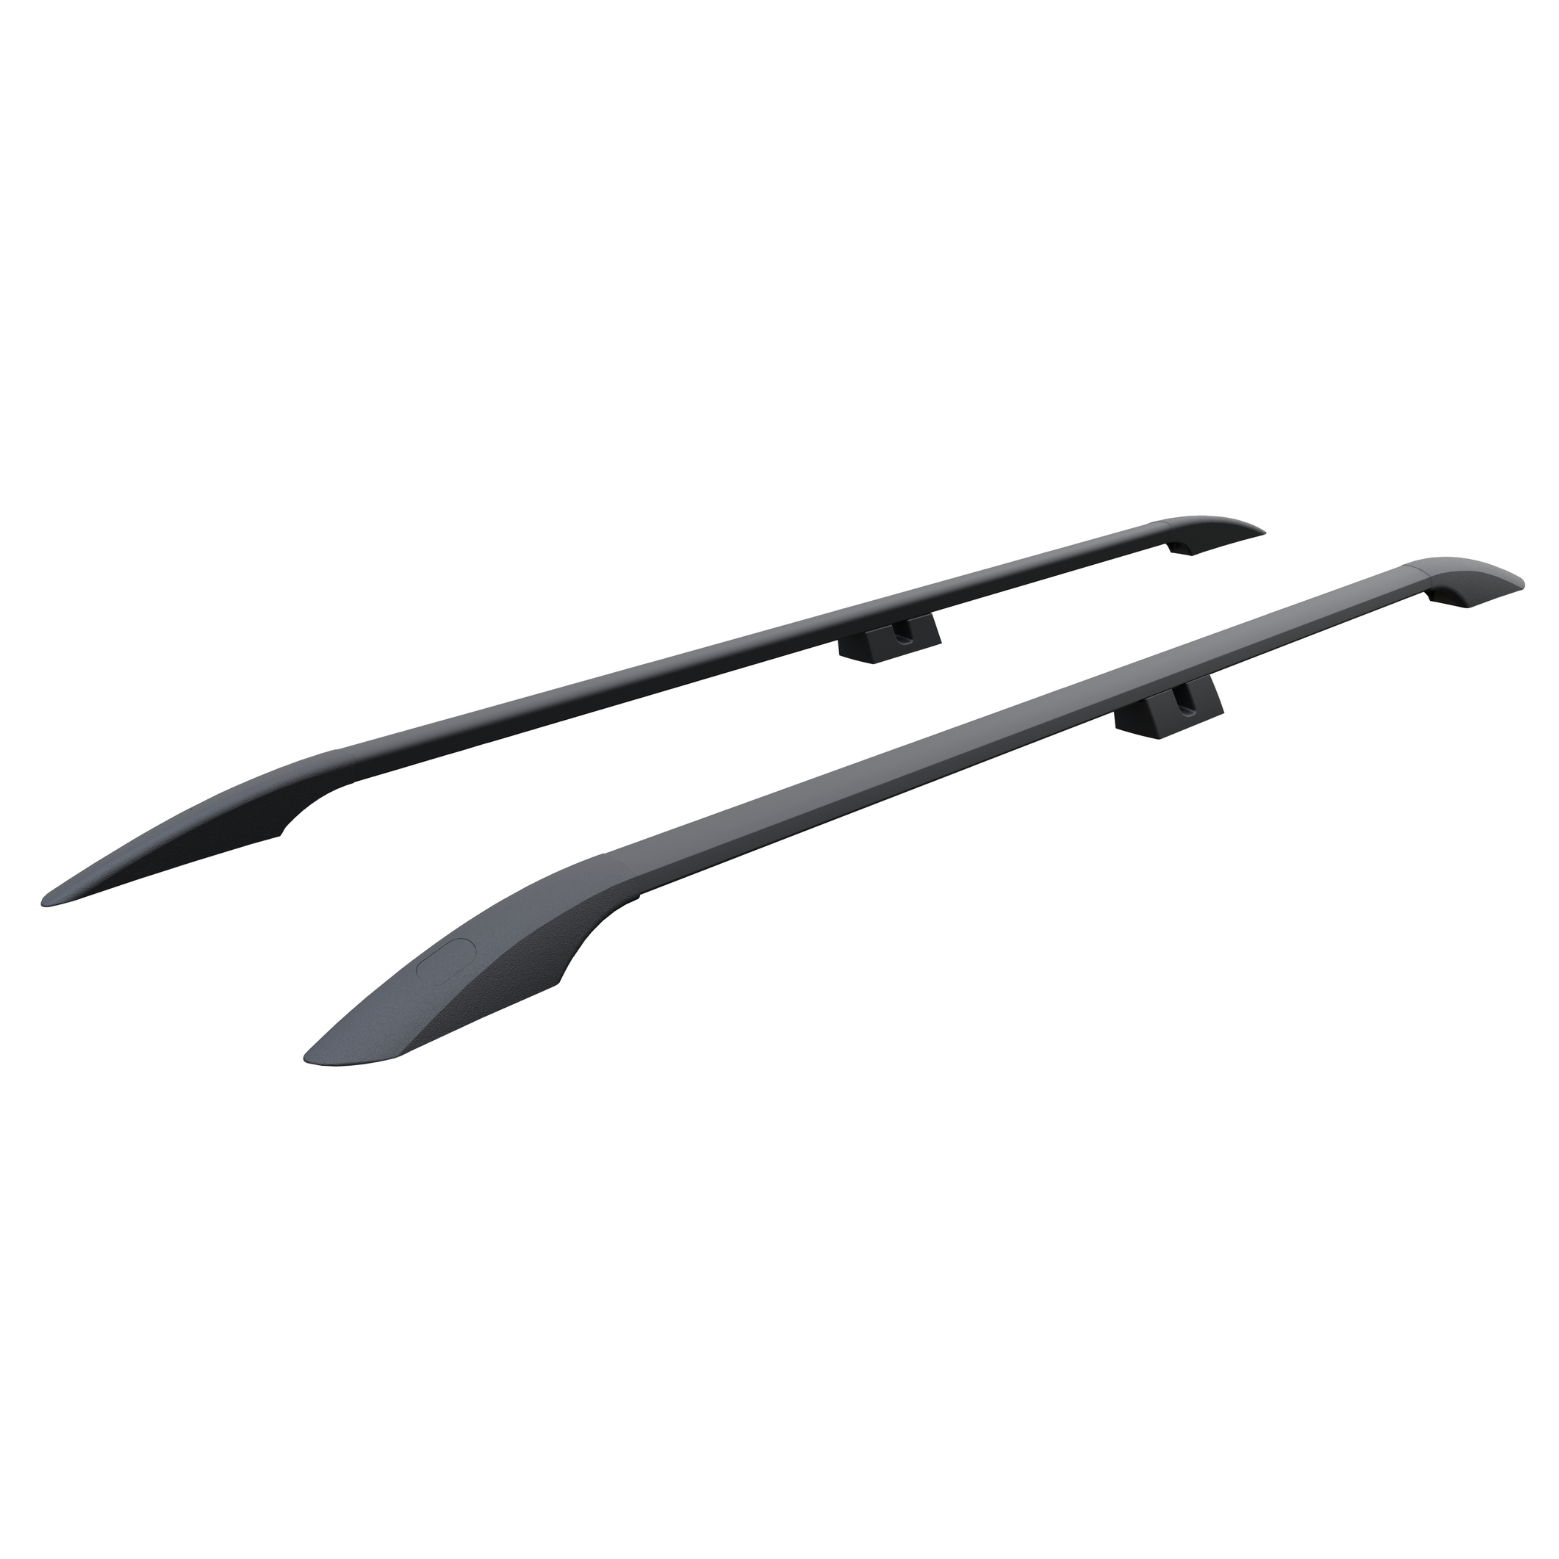 For Mercedes Viano 2003-14 Roof Side Rails Ultimate Style Alu Black